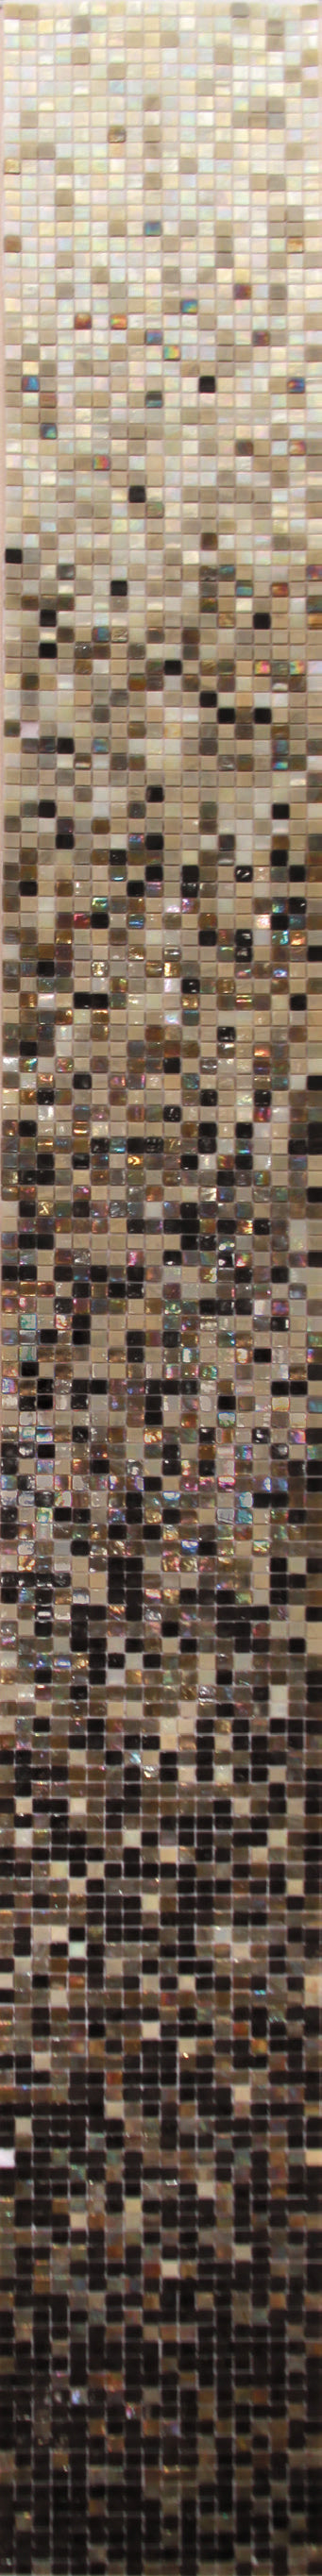 mir alma gradients 0_6 inch de 71 wall and floor mosaic distributed by surface group natural materials